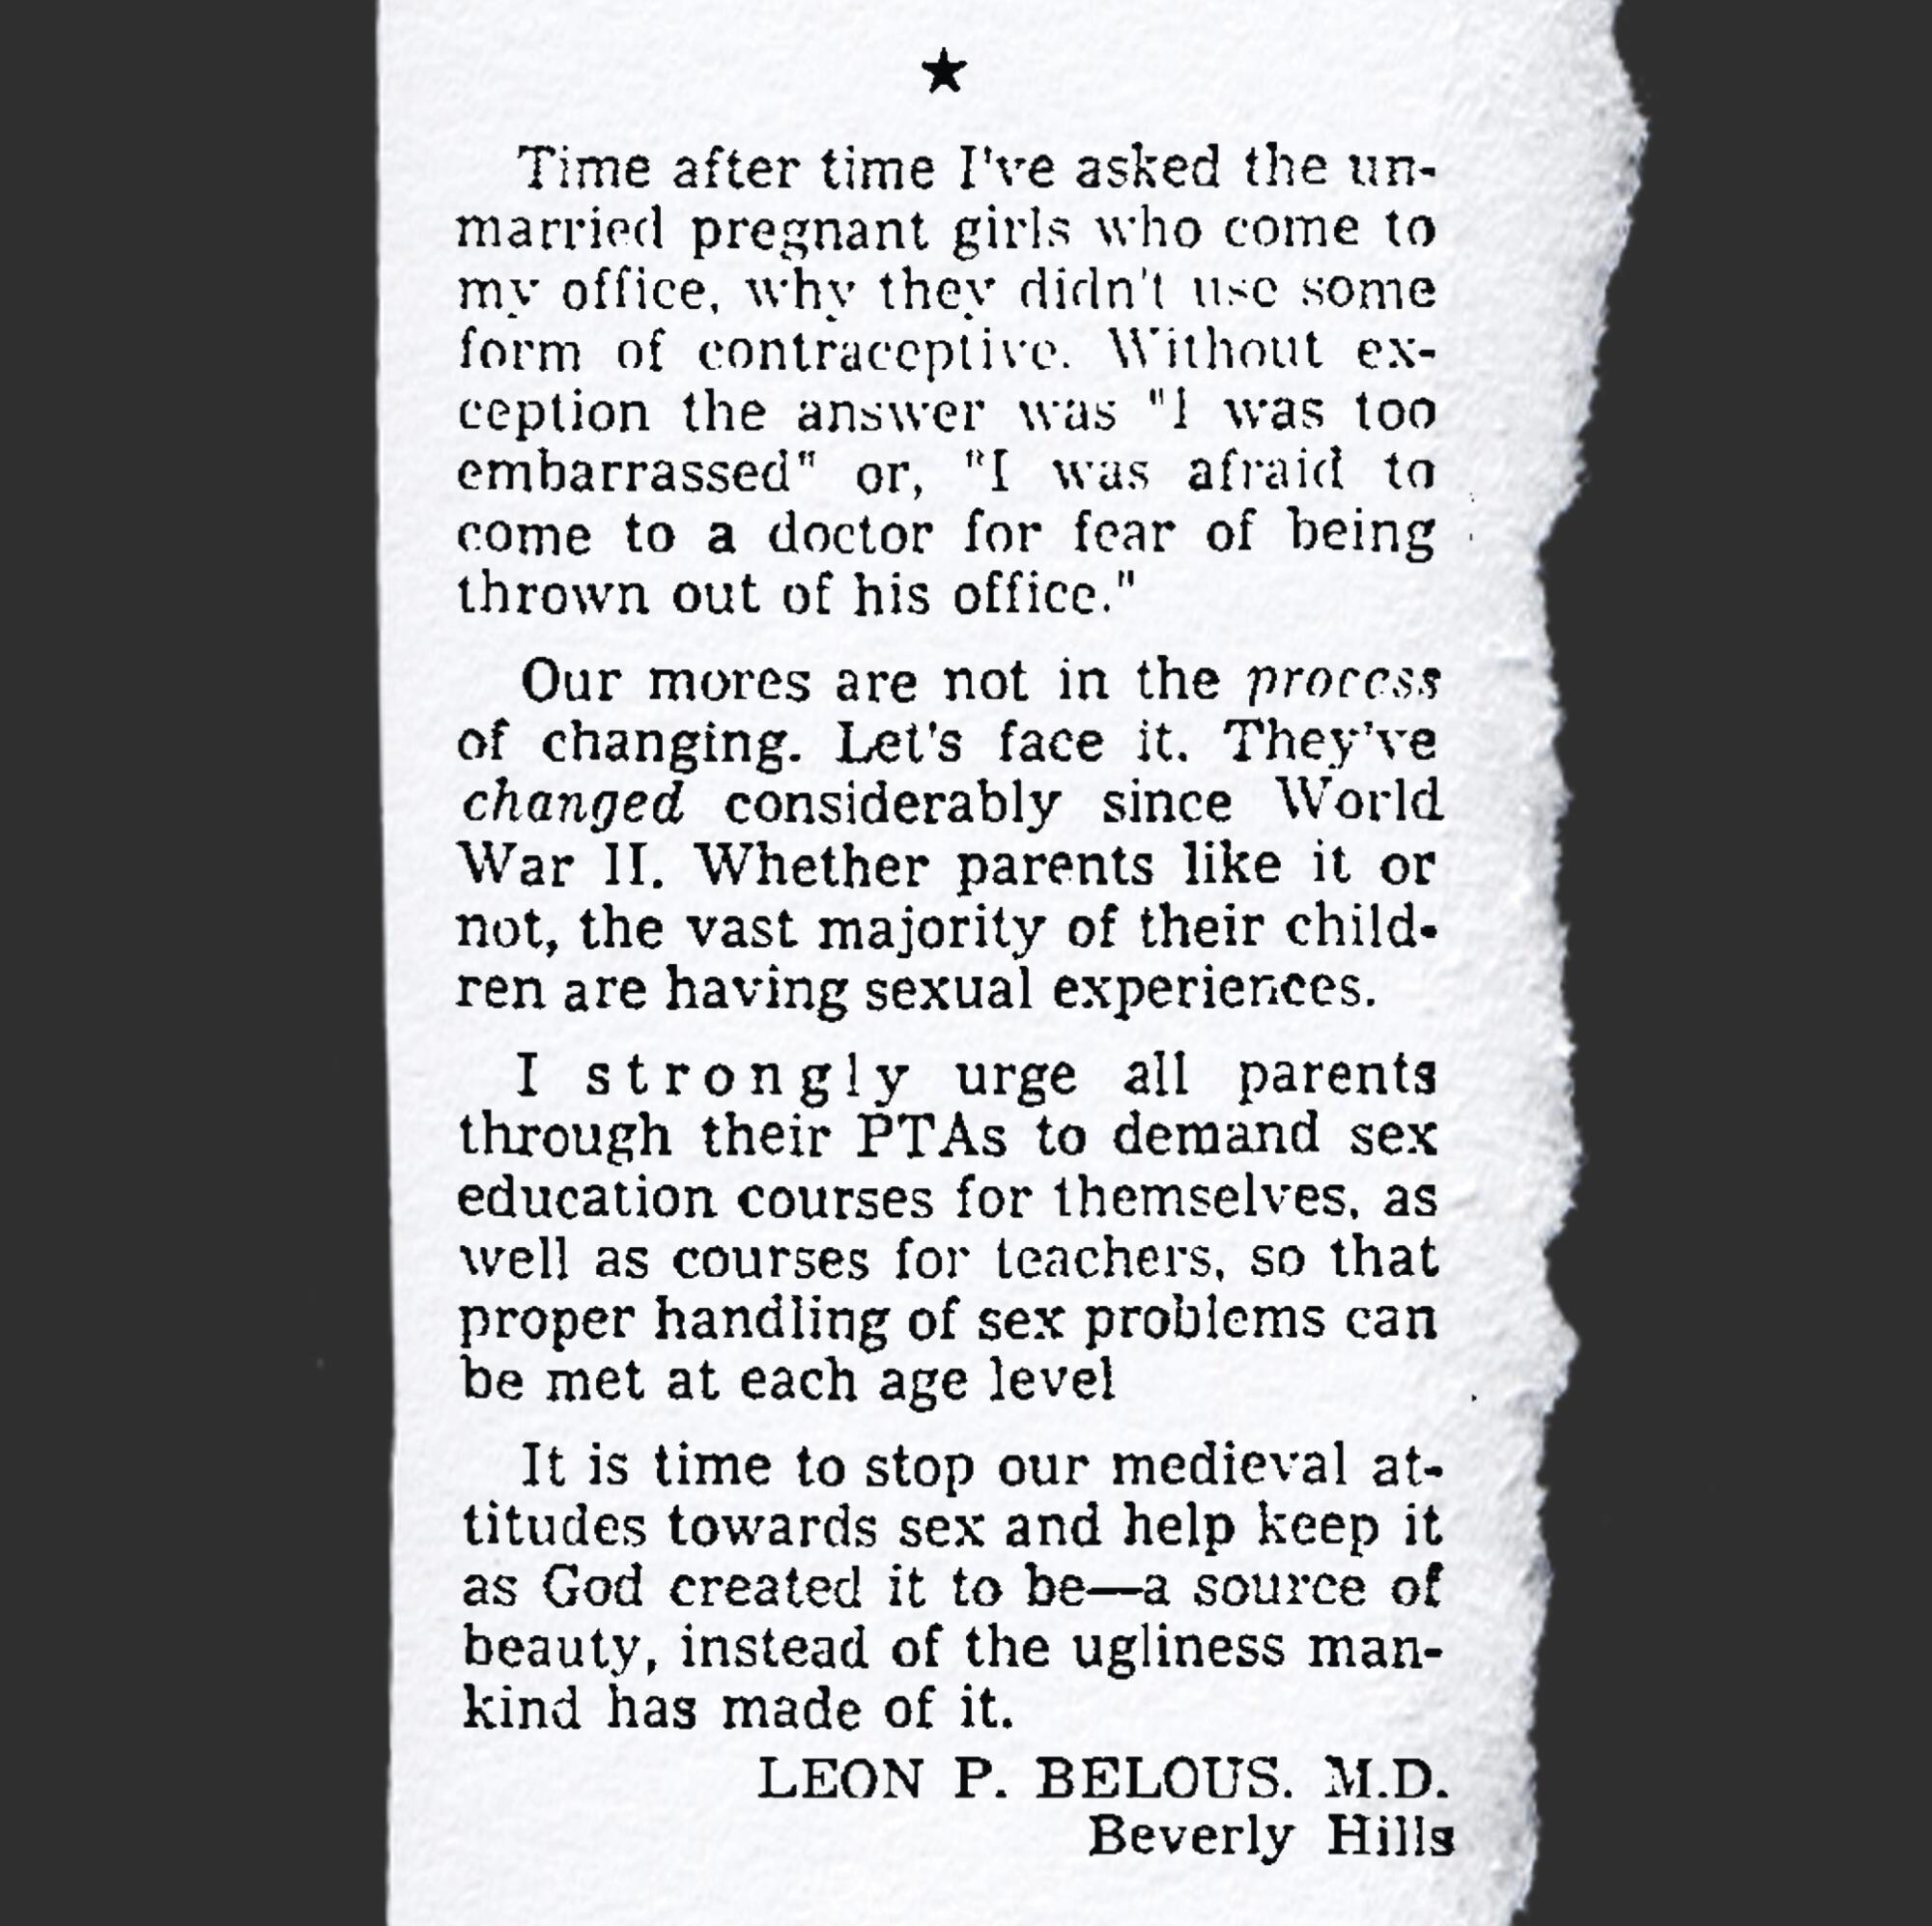 A clipping of a letter to the editor from Dr. Leon P. Belous in the Los Angeles Times in November 1966,